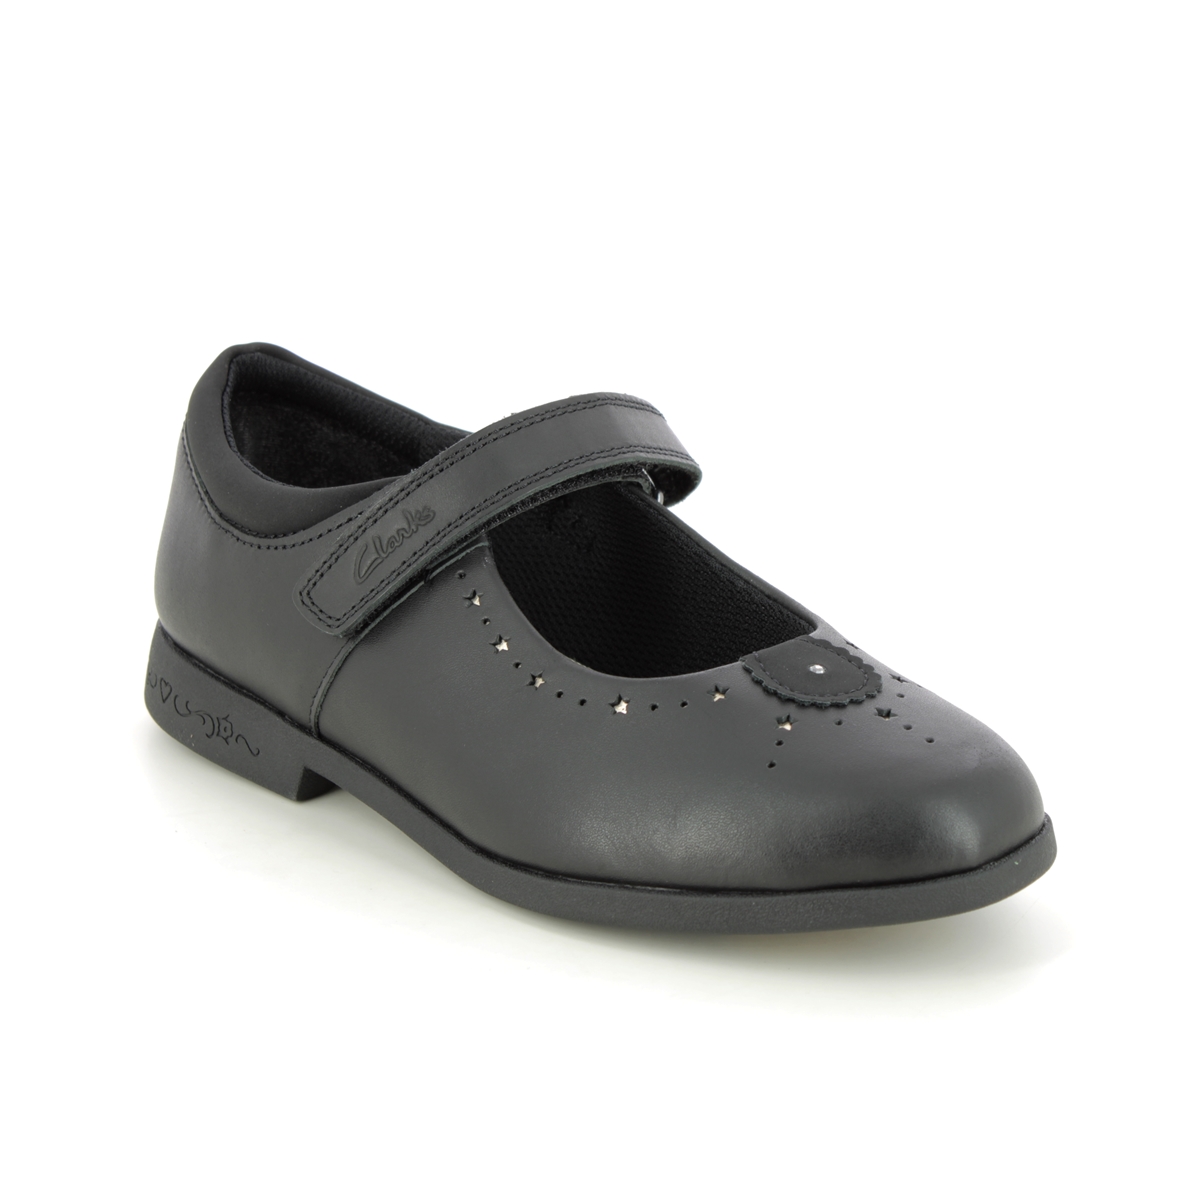 Clarks Magic Step Mj O Black Leather Kids Girls School Shoes 697056F In Size 3 In Plain Black Leather F Width Fitting Regular Fit For School For kids